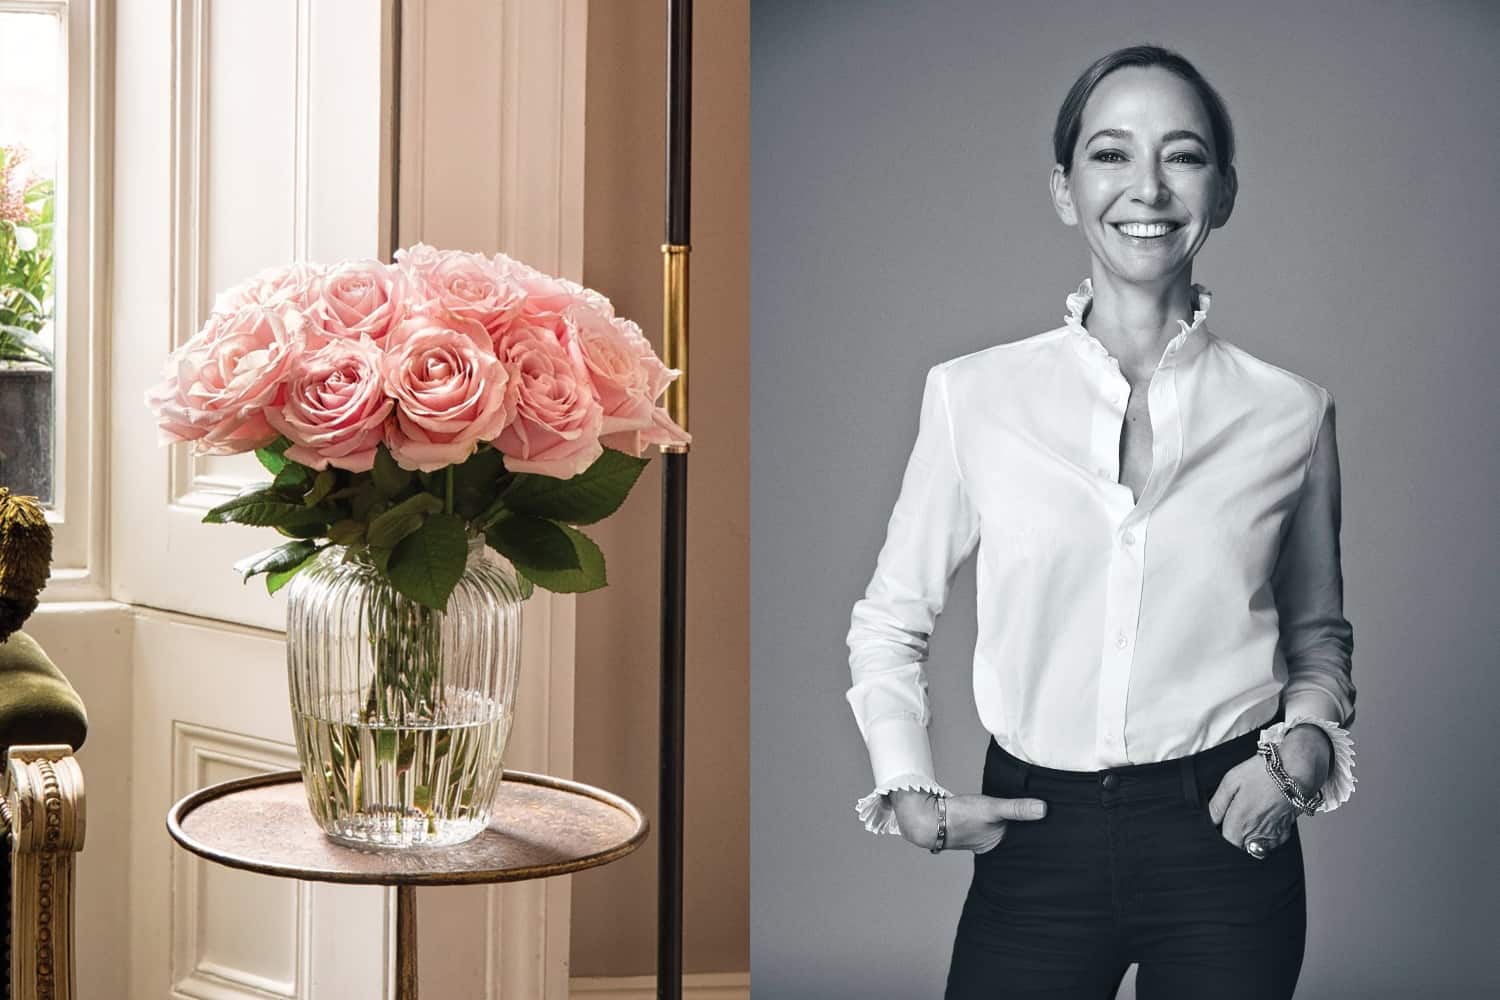 How FlowerBx Founder Whitney Bromberg Went From a Career in Fashion to Florals